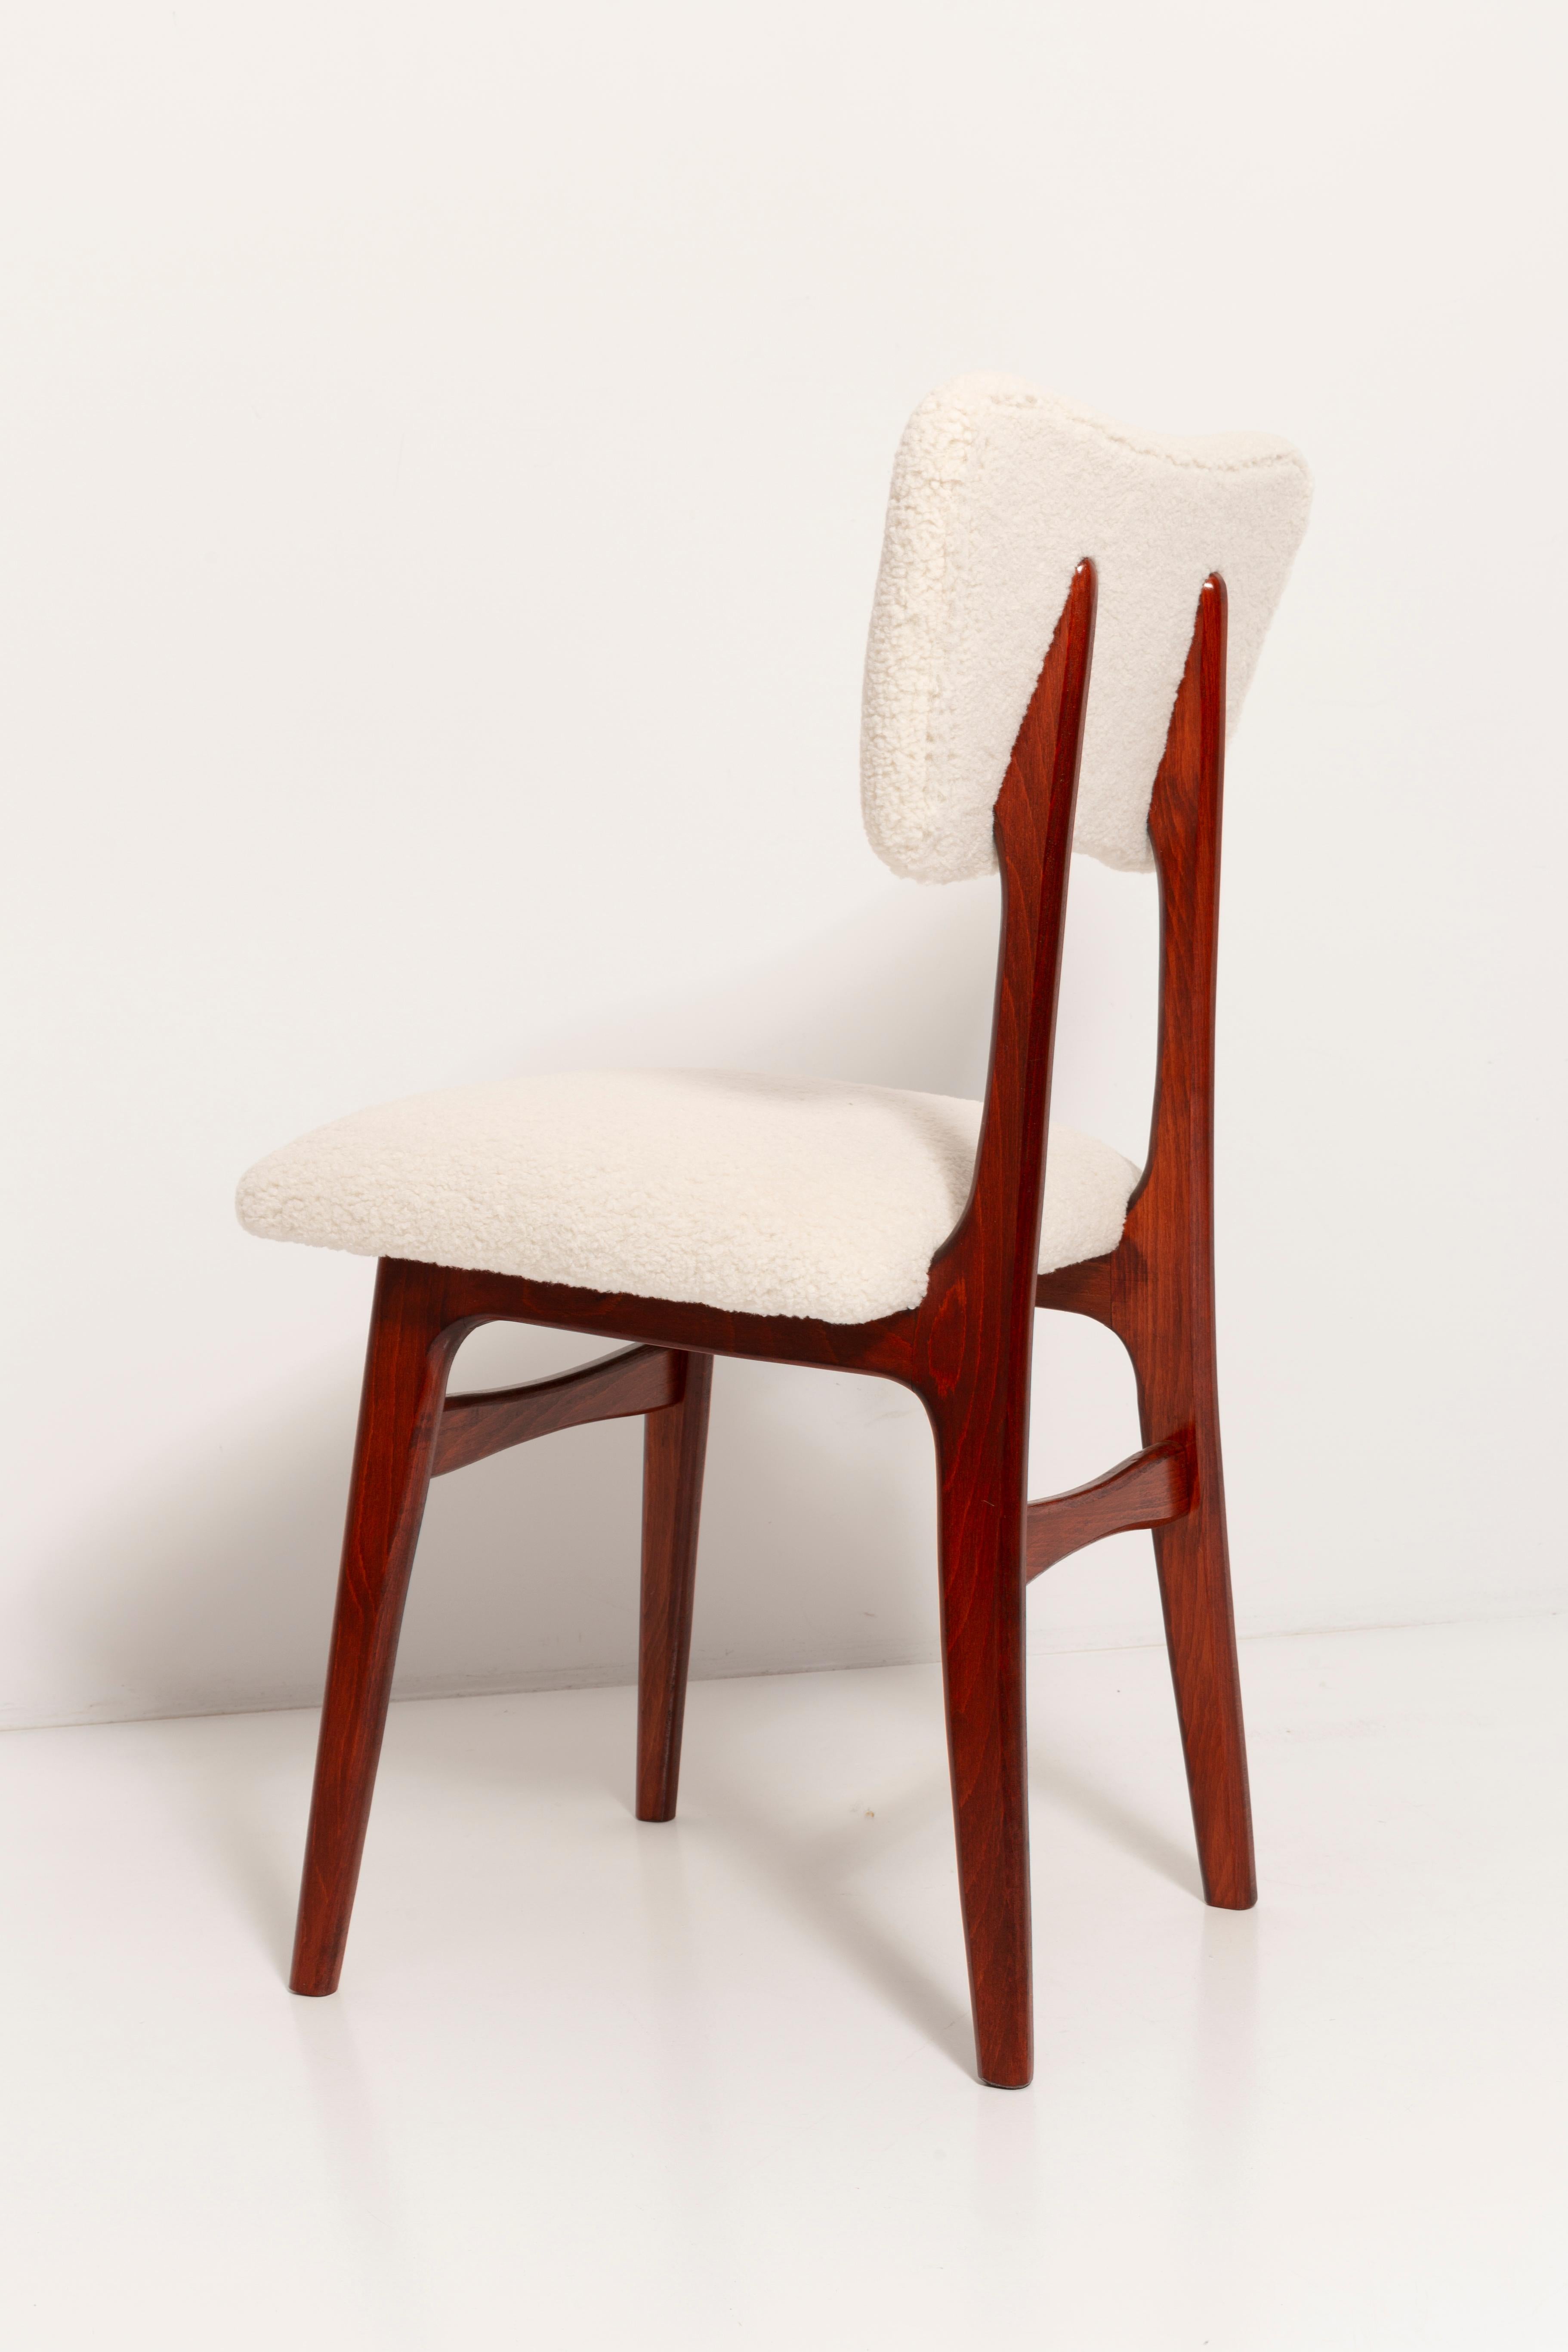 20th Century Light Crème Boucle Cherry Wood Chair, Europe, 1960 For Sale 6